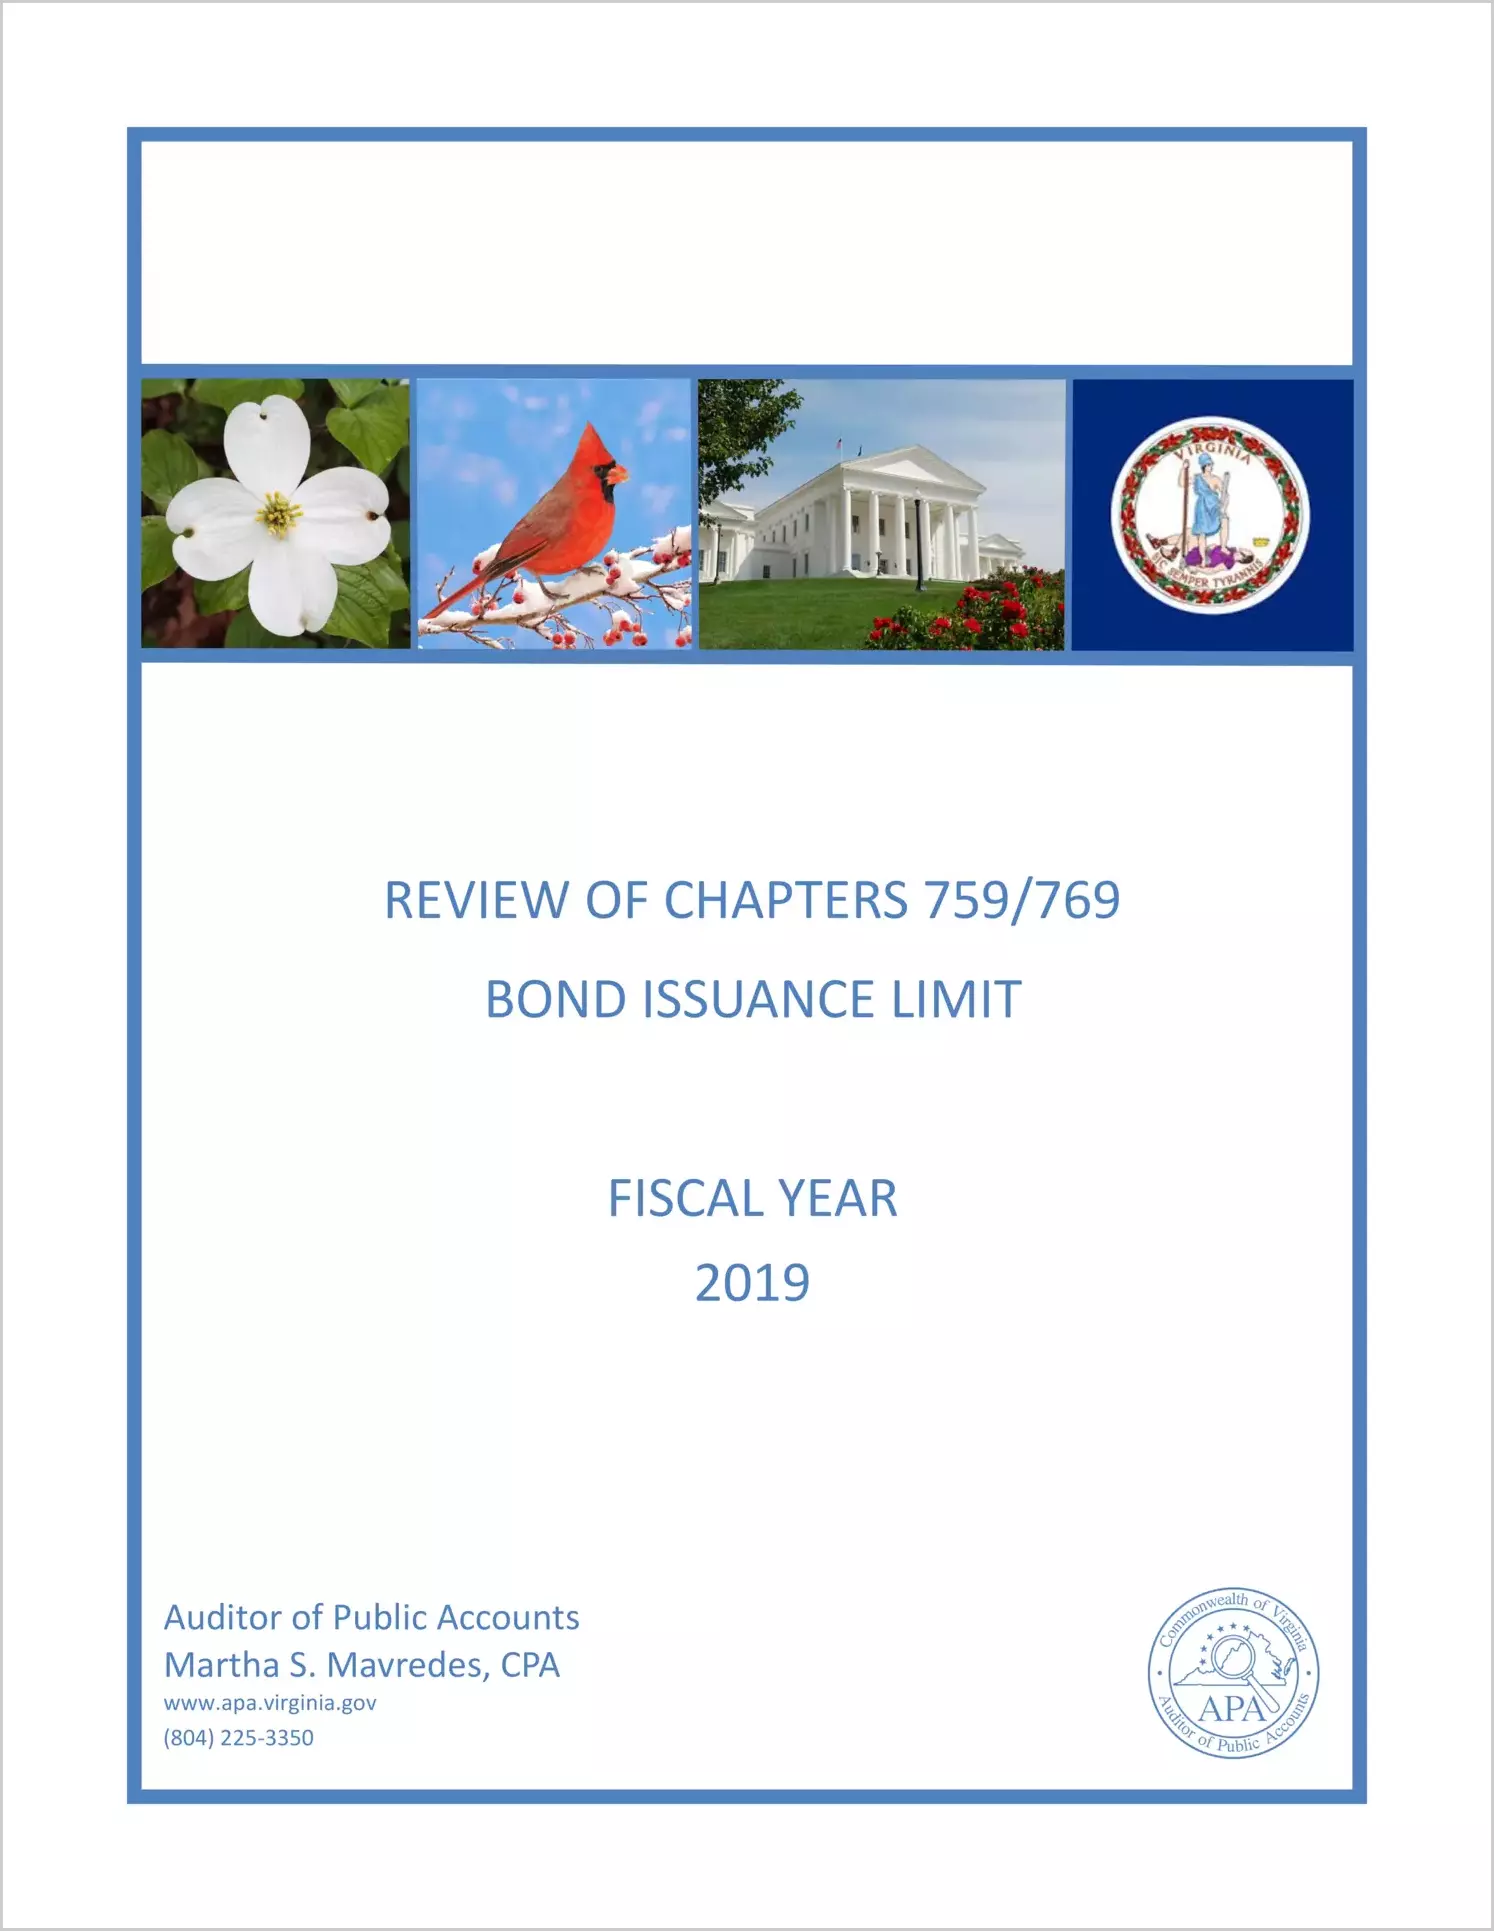 Review of Chapters 759/769 Bond Issuance Limit Fiscal Year 2019